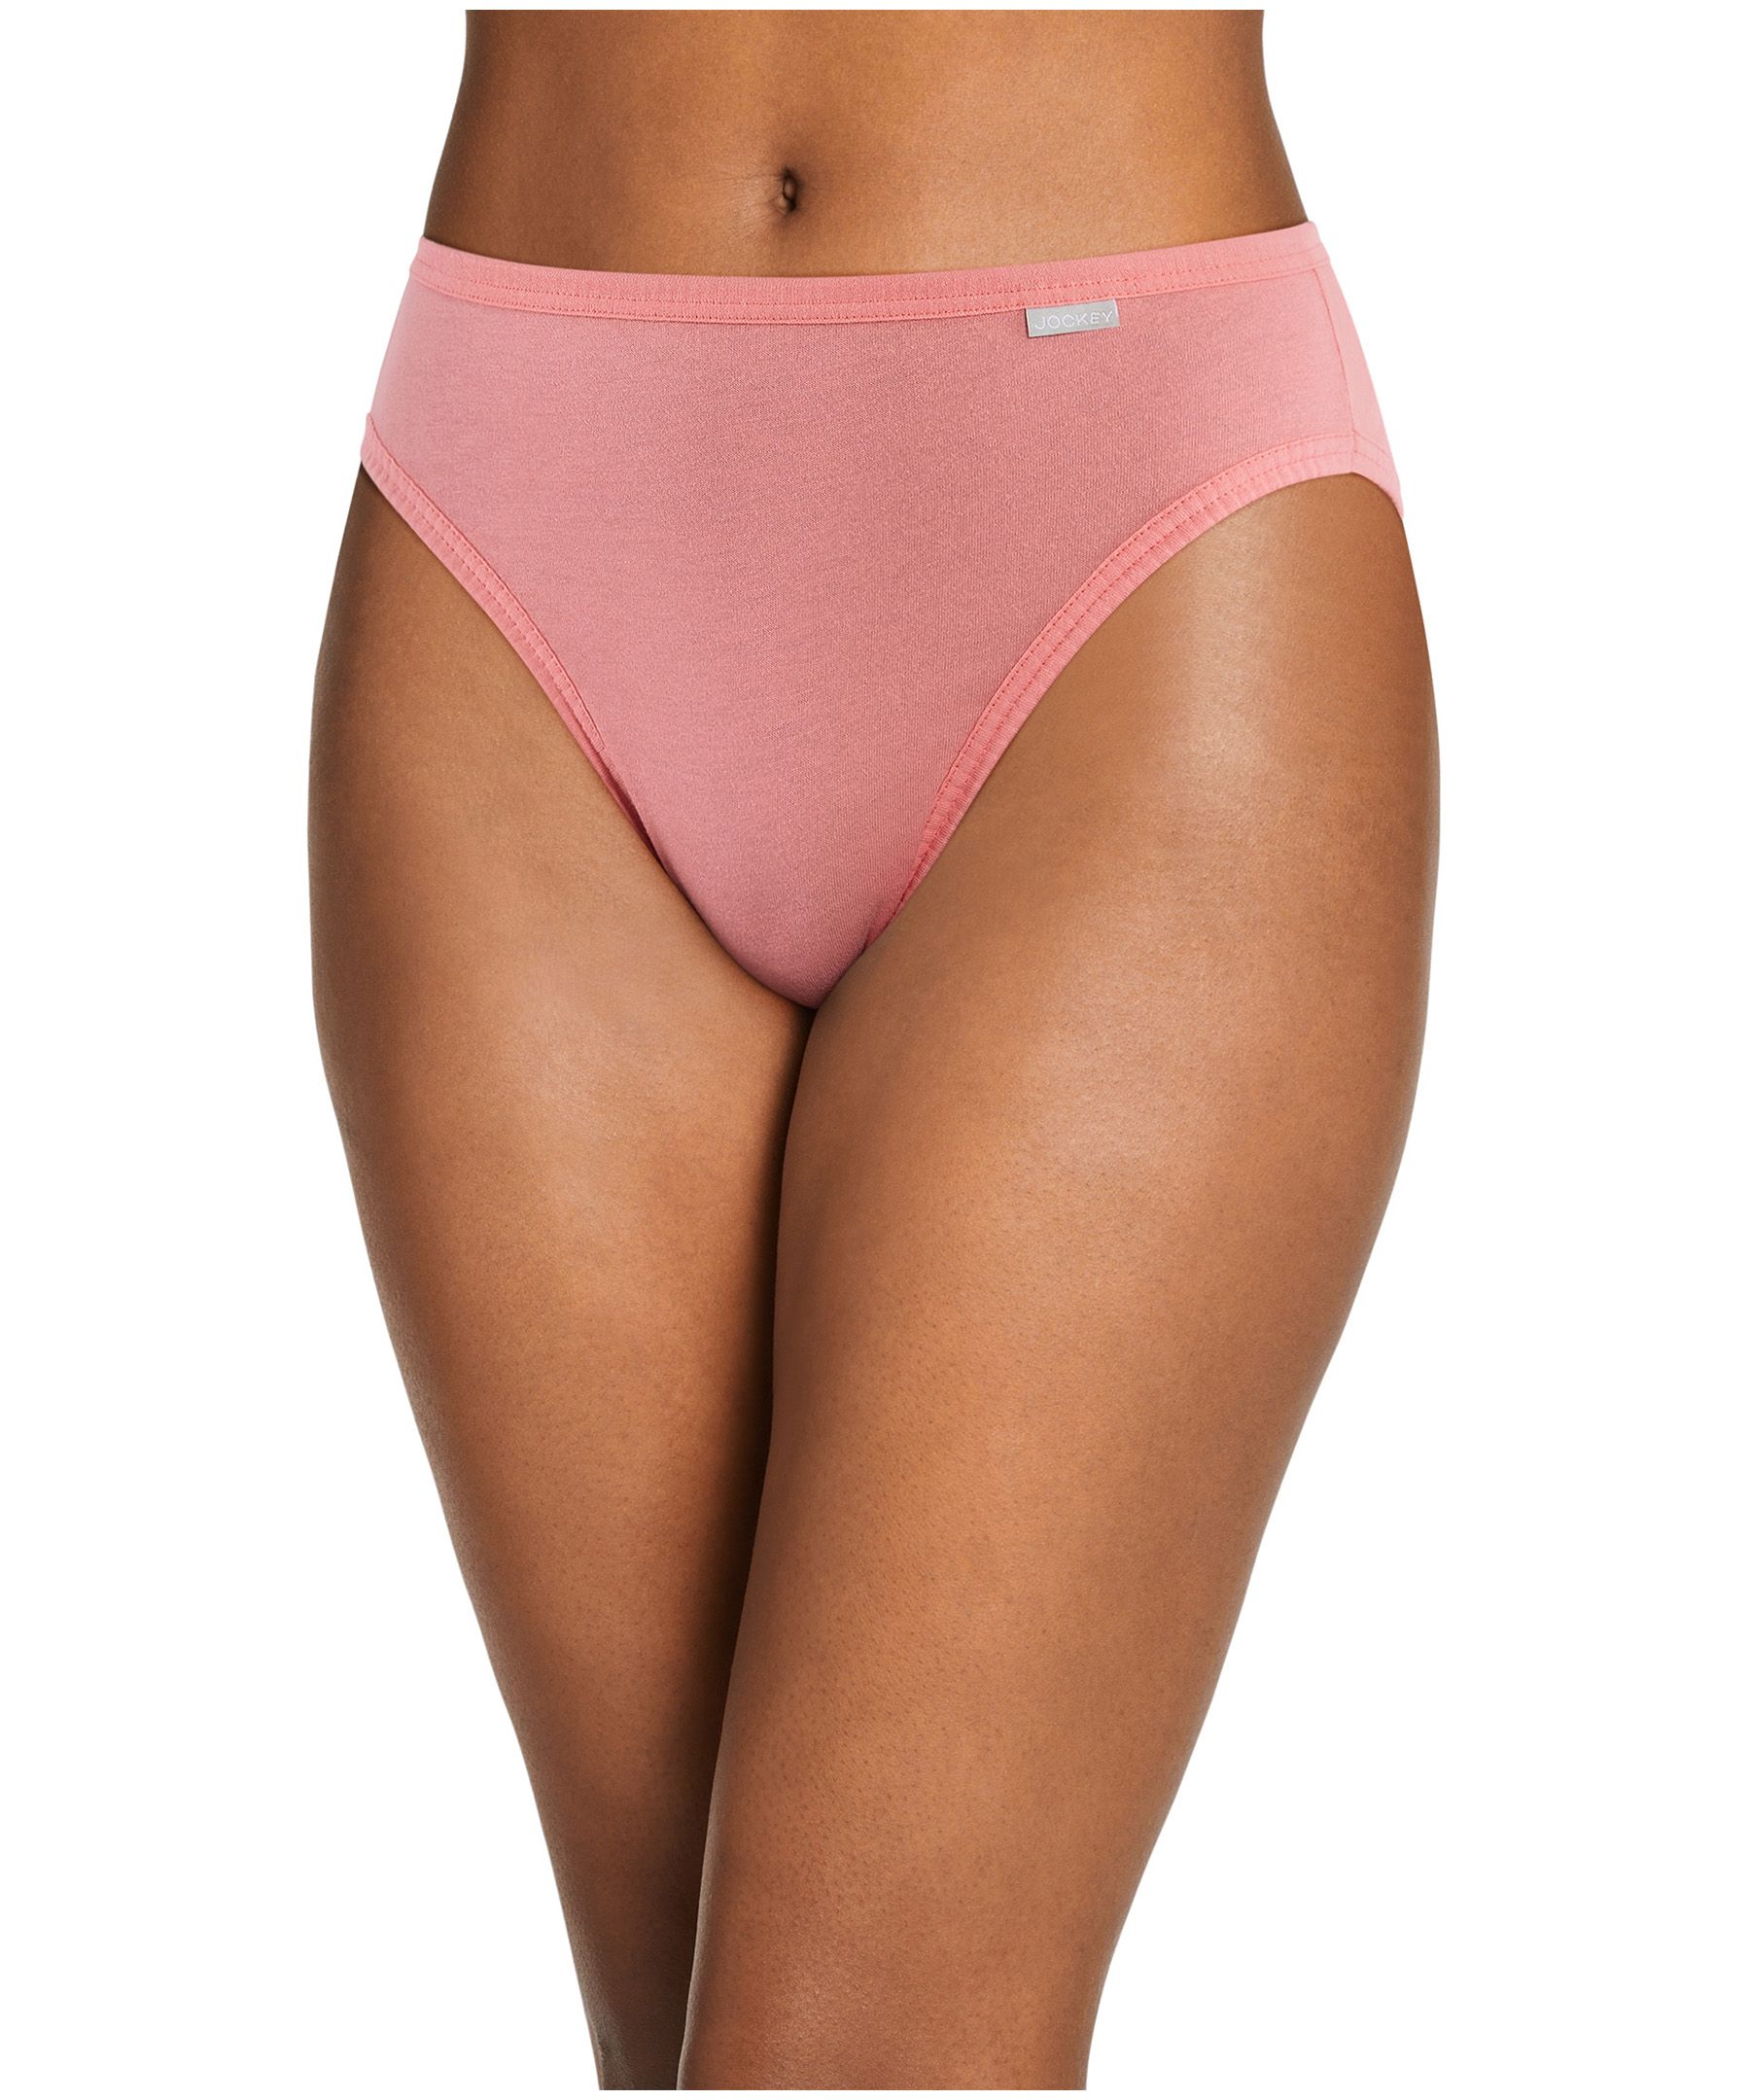 https://media-www.marks.com/product/marks-work-wearhouse/ladies-world/ladies-accessories/410037499195/jockey-women-s-3-pack-elance-basic-underwear-french-cut-briefs-ce1a3cfe-24f3-499c-ae5a-e2195adf0fde-jpgrendition.jpg?imdensity=1&imwidth=1244&impolicy=mZoom